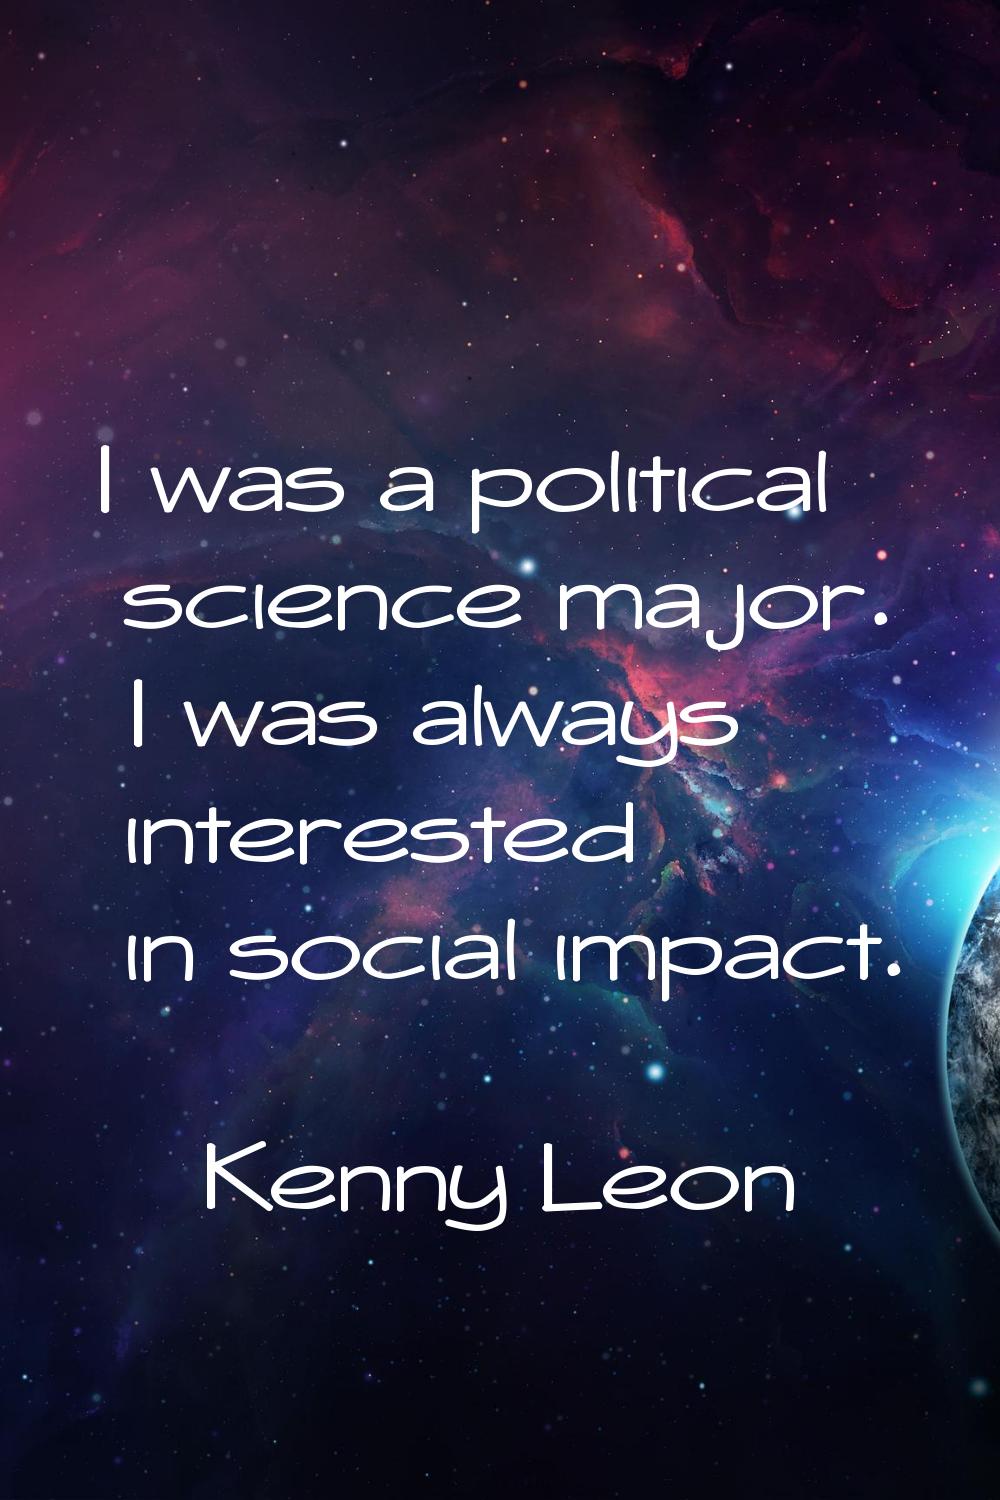 I was a political science major. I was always interested in social impact.